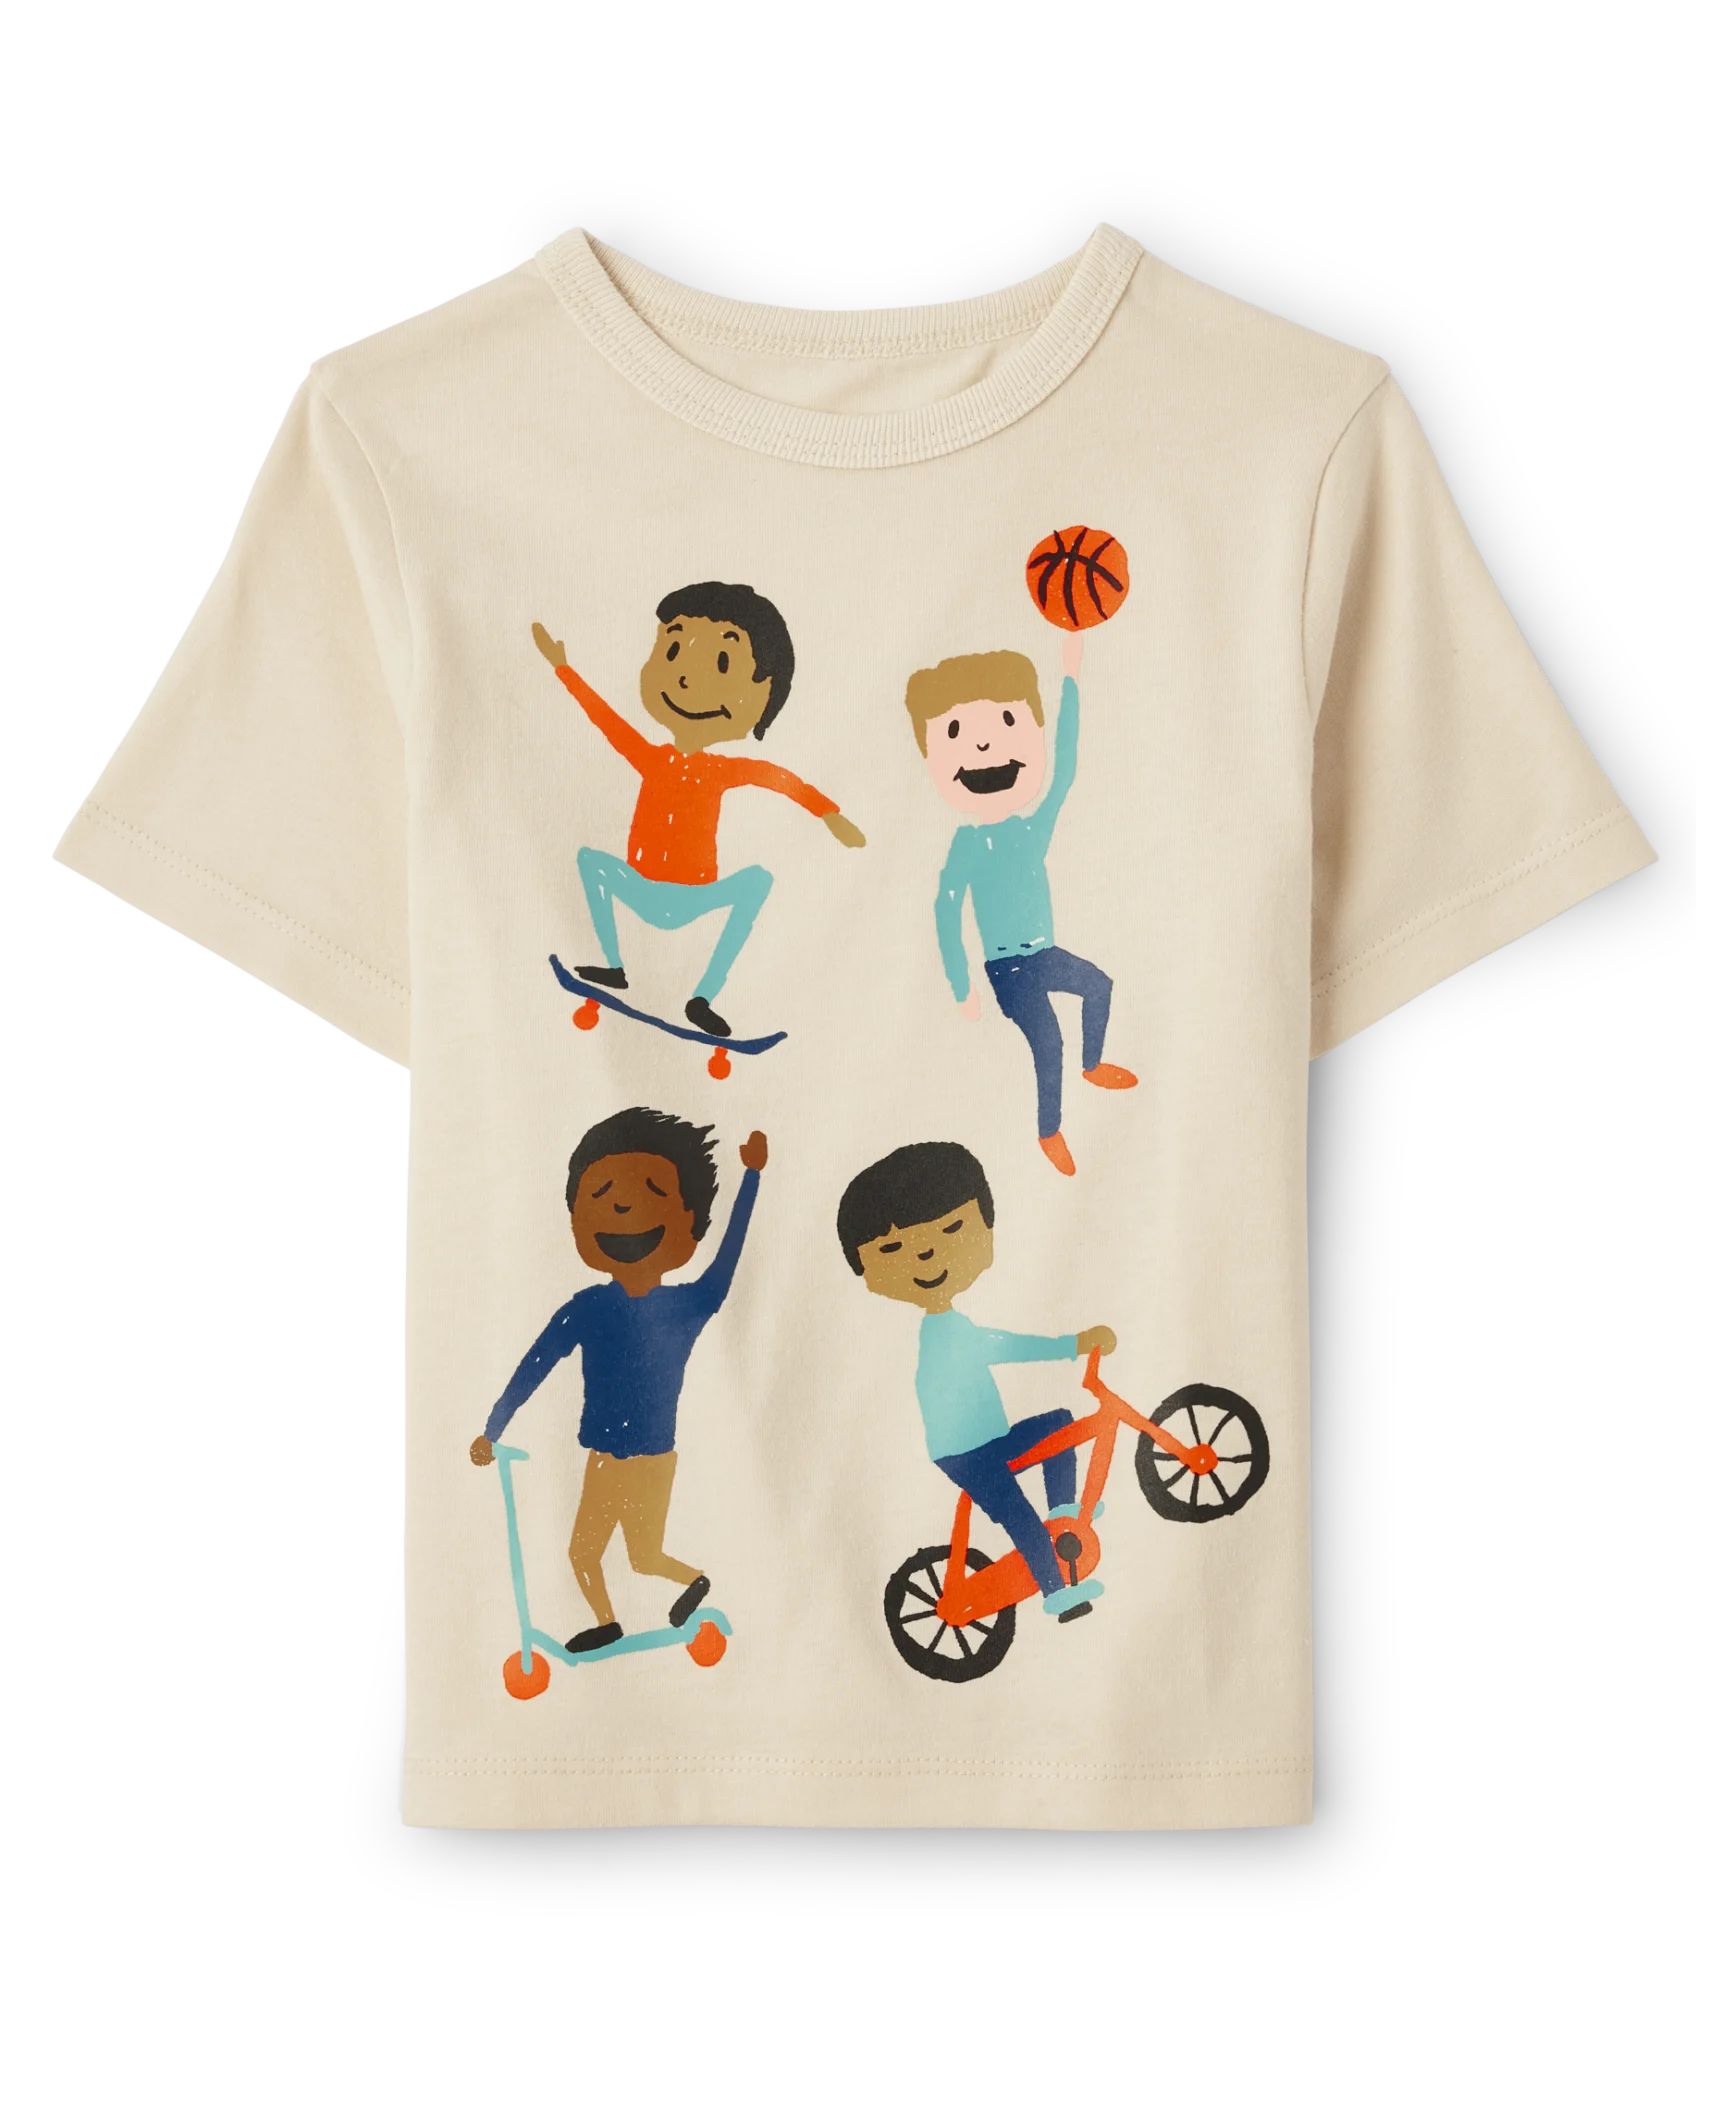 Baby And Toddler Boys Sports Graphic Tee - hay stack | The Children's Place